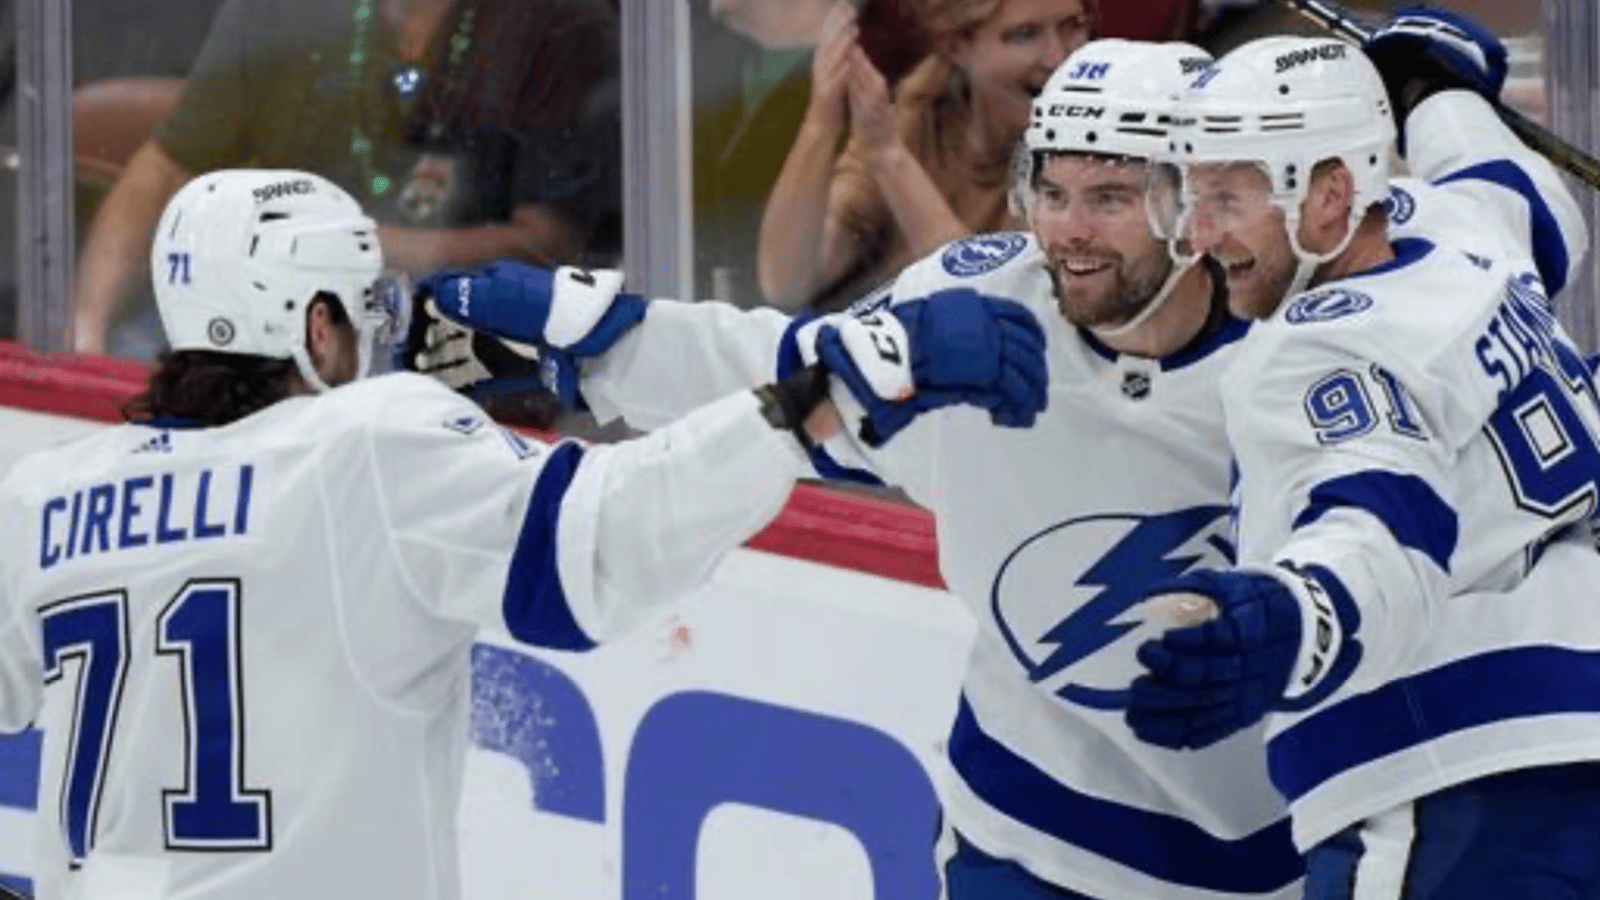 Anthony Cirelli unhappy after departure of Steven Stamkos 